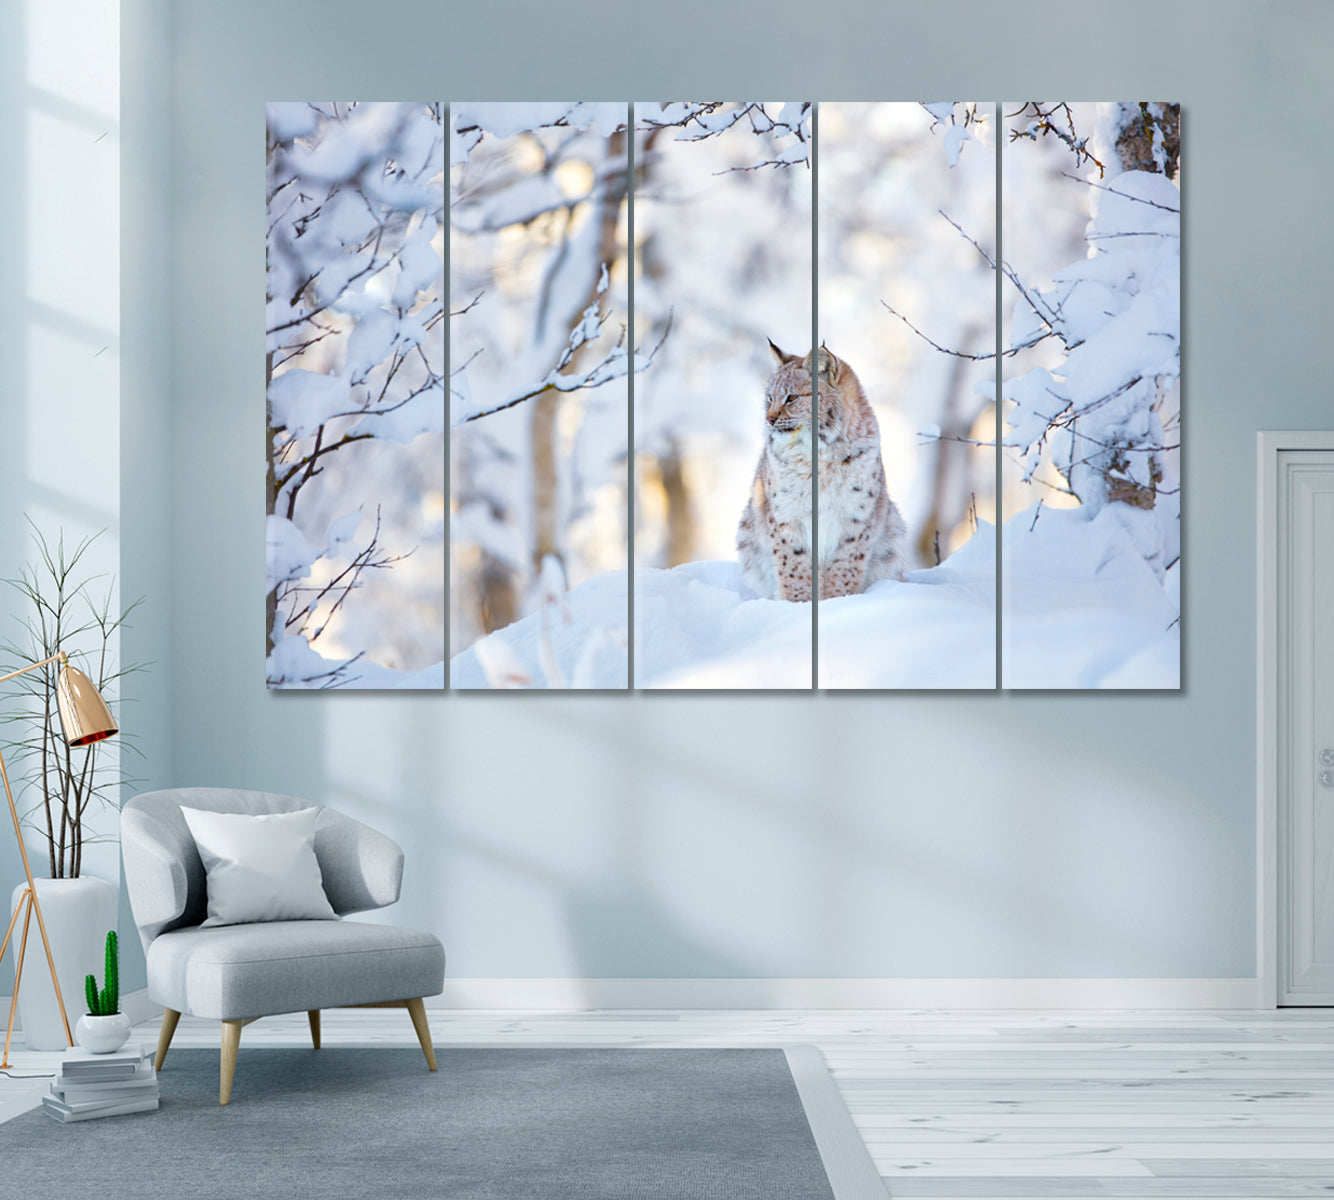 Lynx in Winter Forest Canvas Print ArtLexy 5 Panels 36"x24" inches 